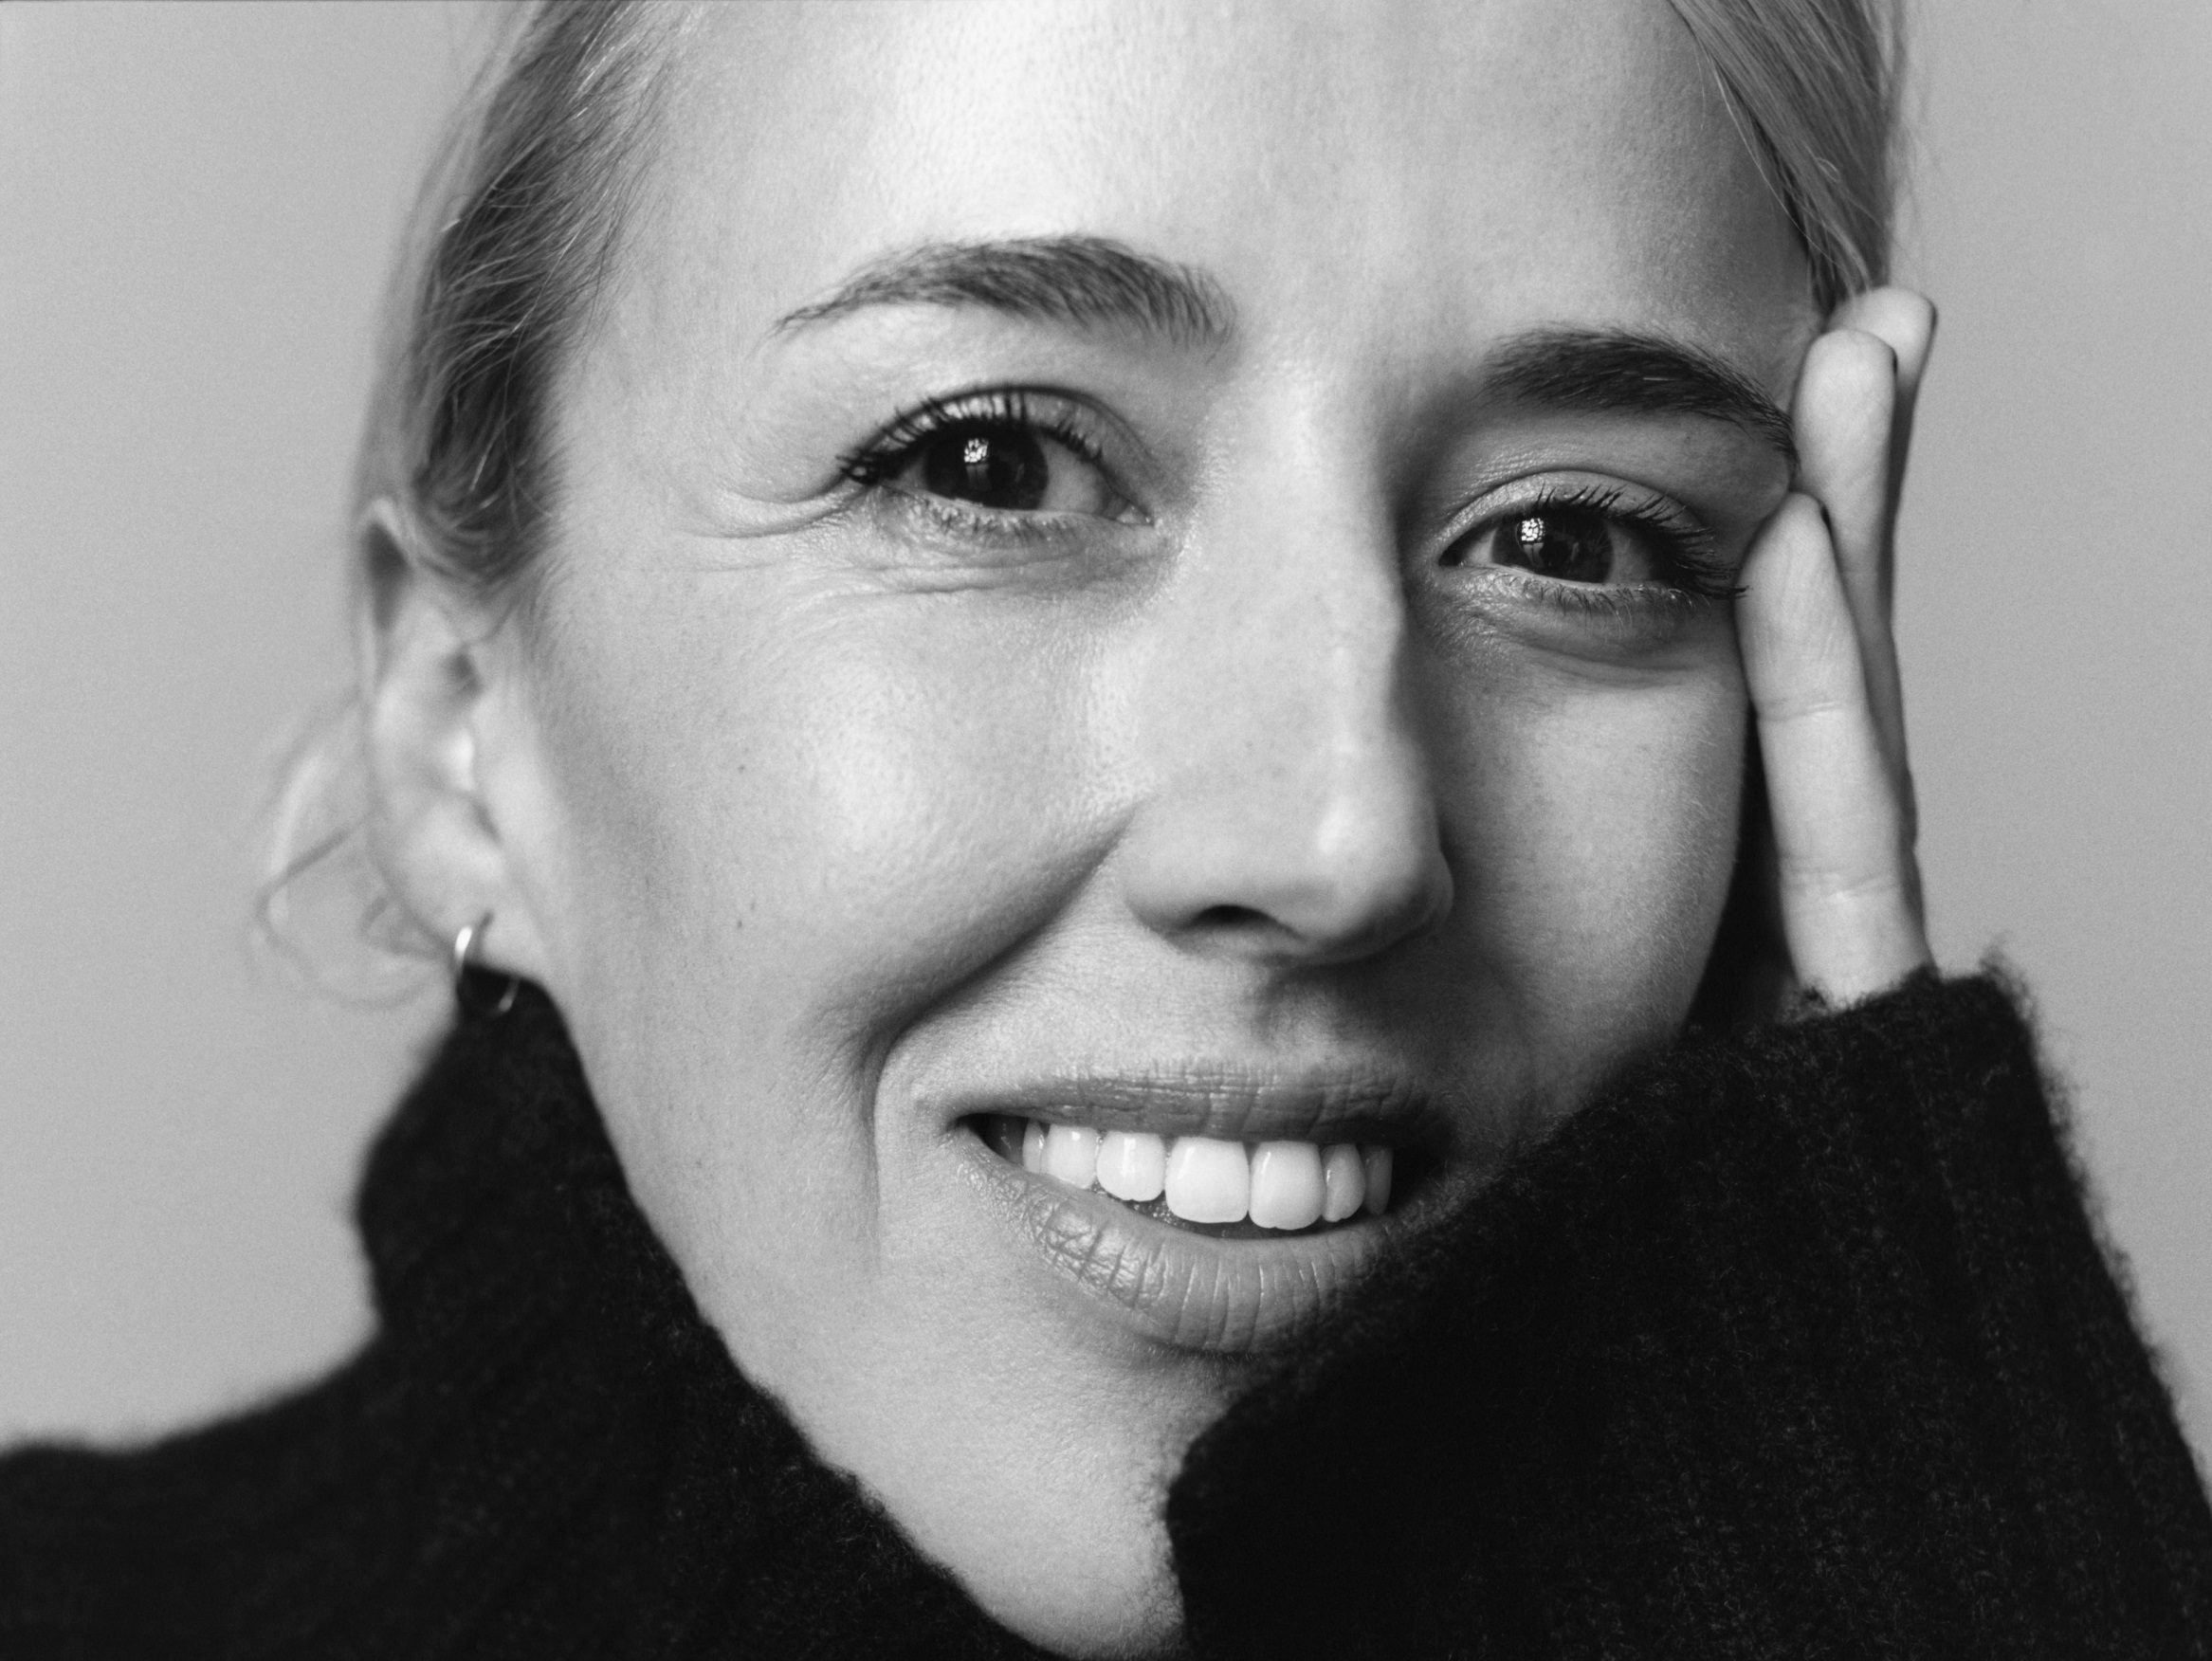 Global editor-in-chief of UK style magazine i-D moves to Vogue International